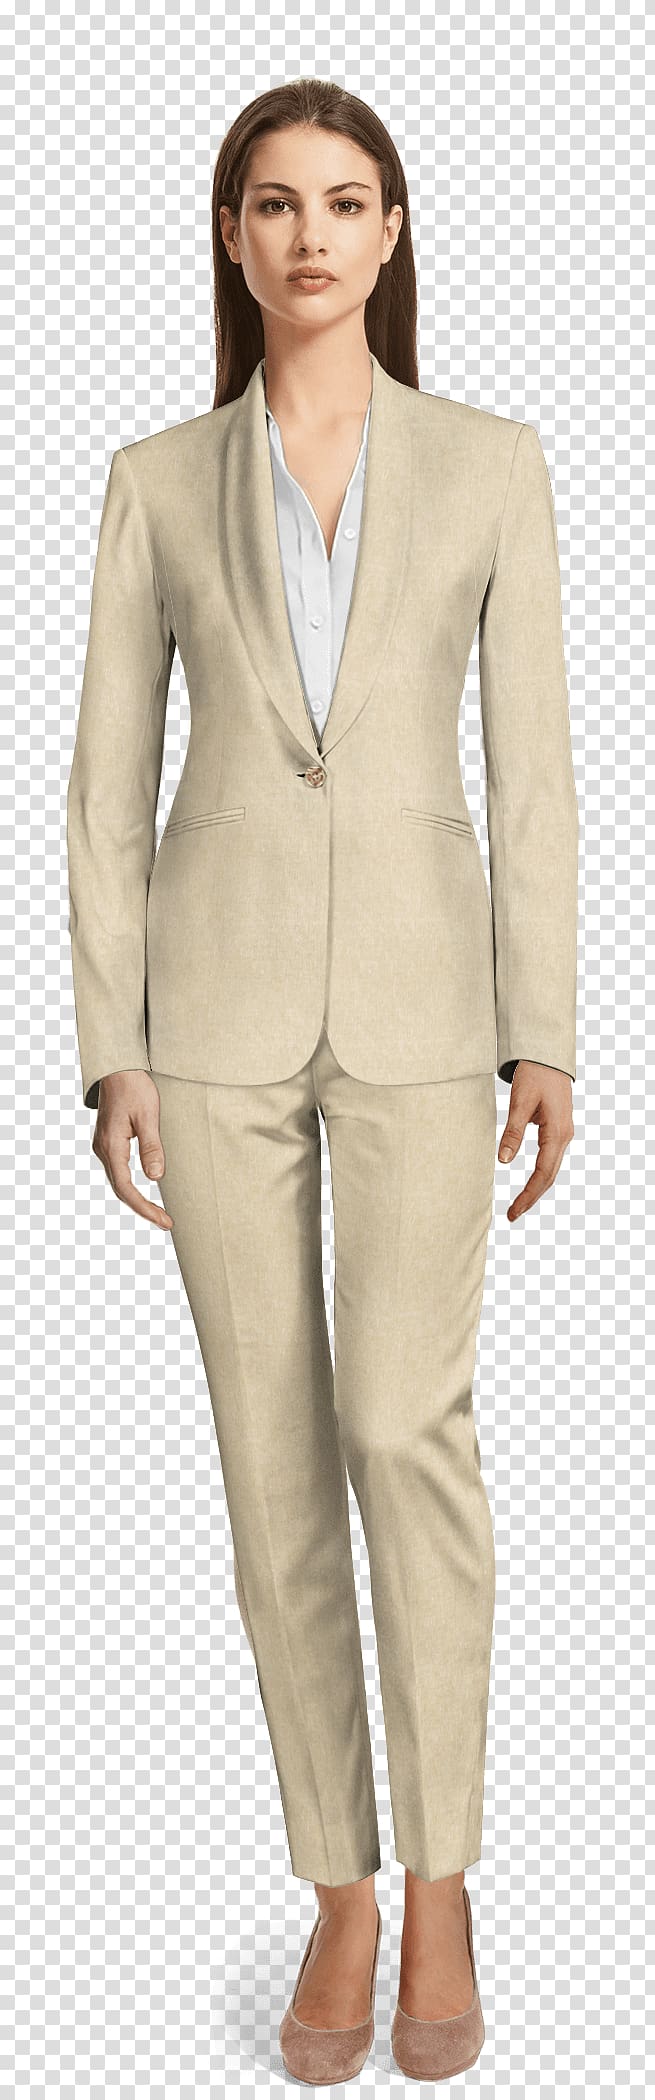 Pant Suits Lapel Double-breasted Single-breasted, suit woman transparent background PNG clipart